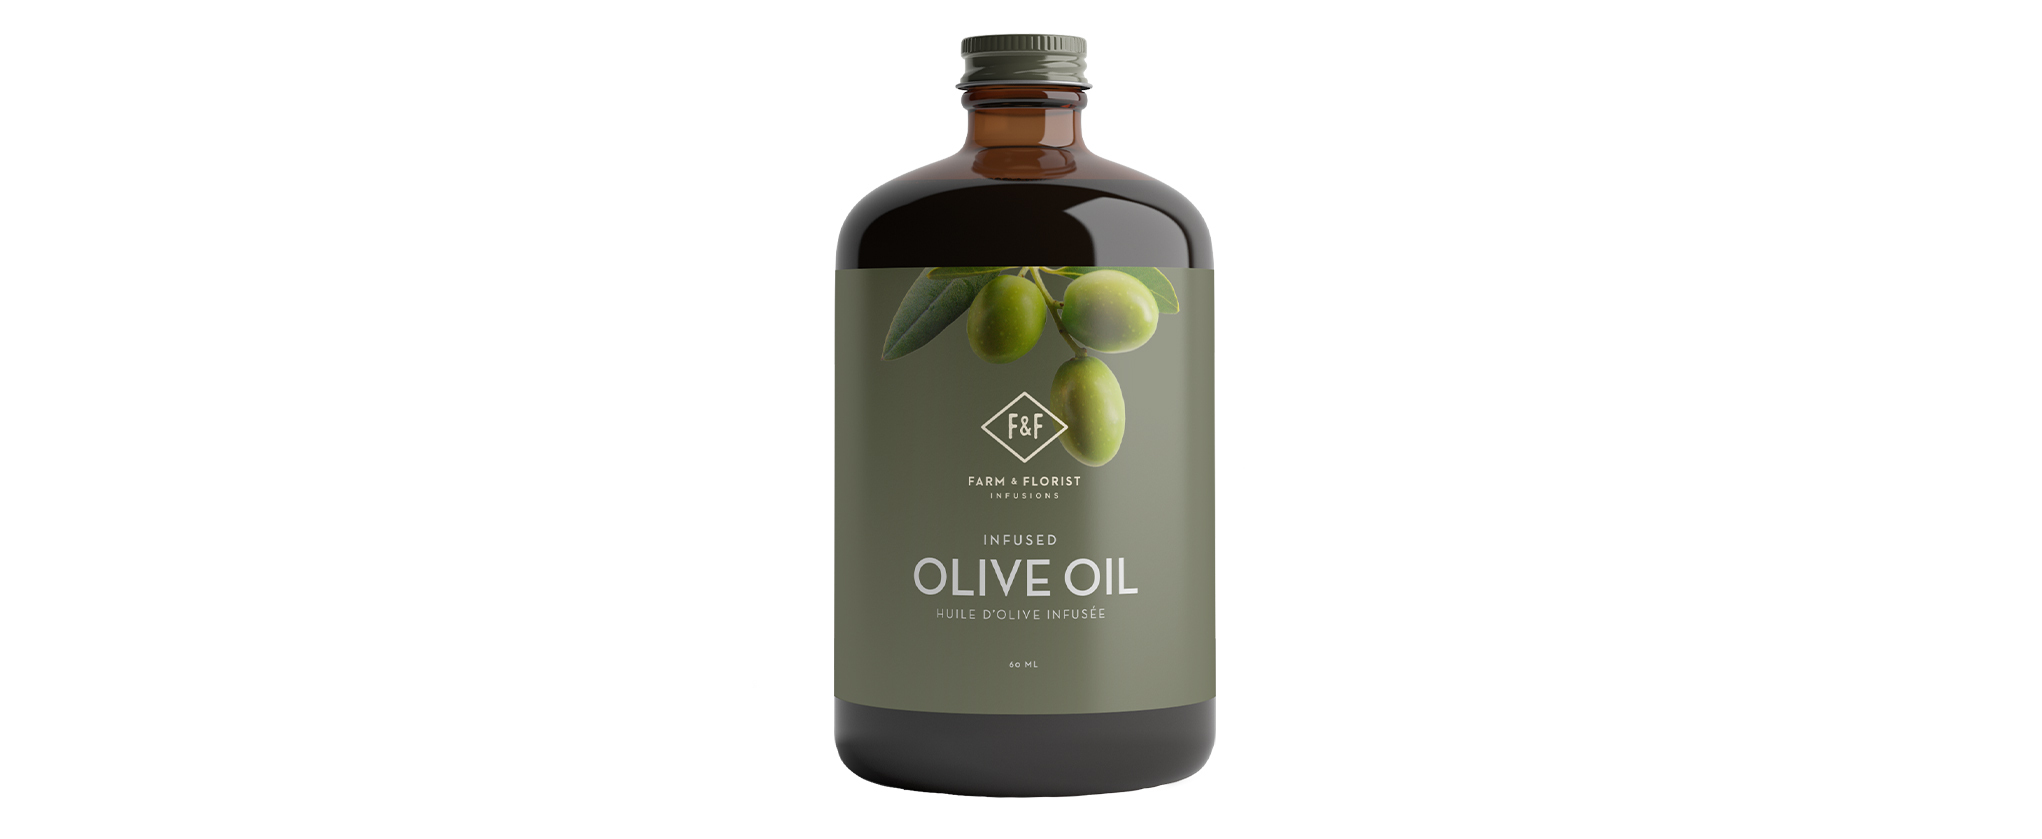 FF-Product-Image-Hero-Olive-Oil[2042×938] (2)